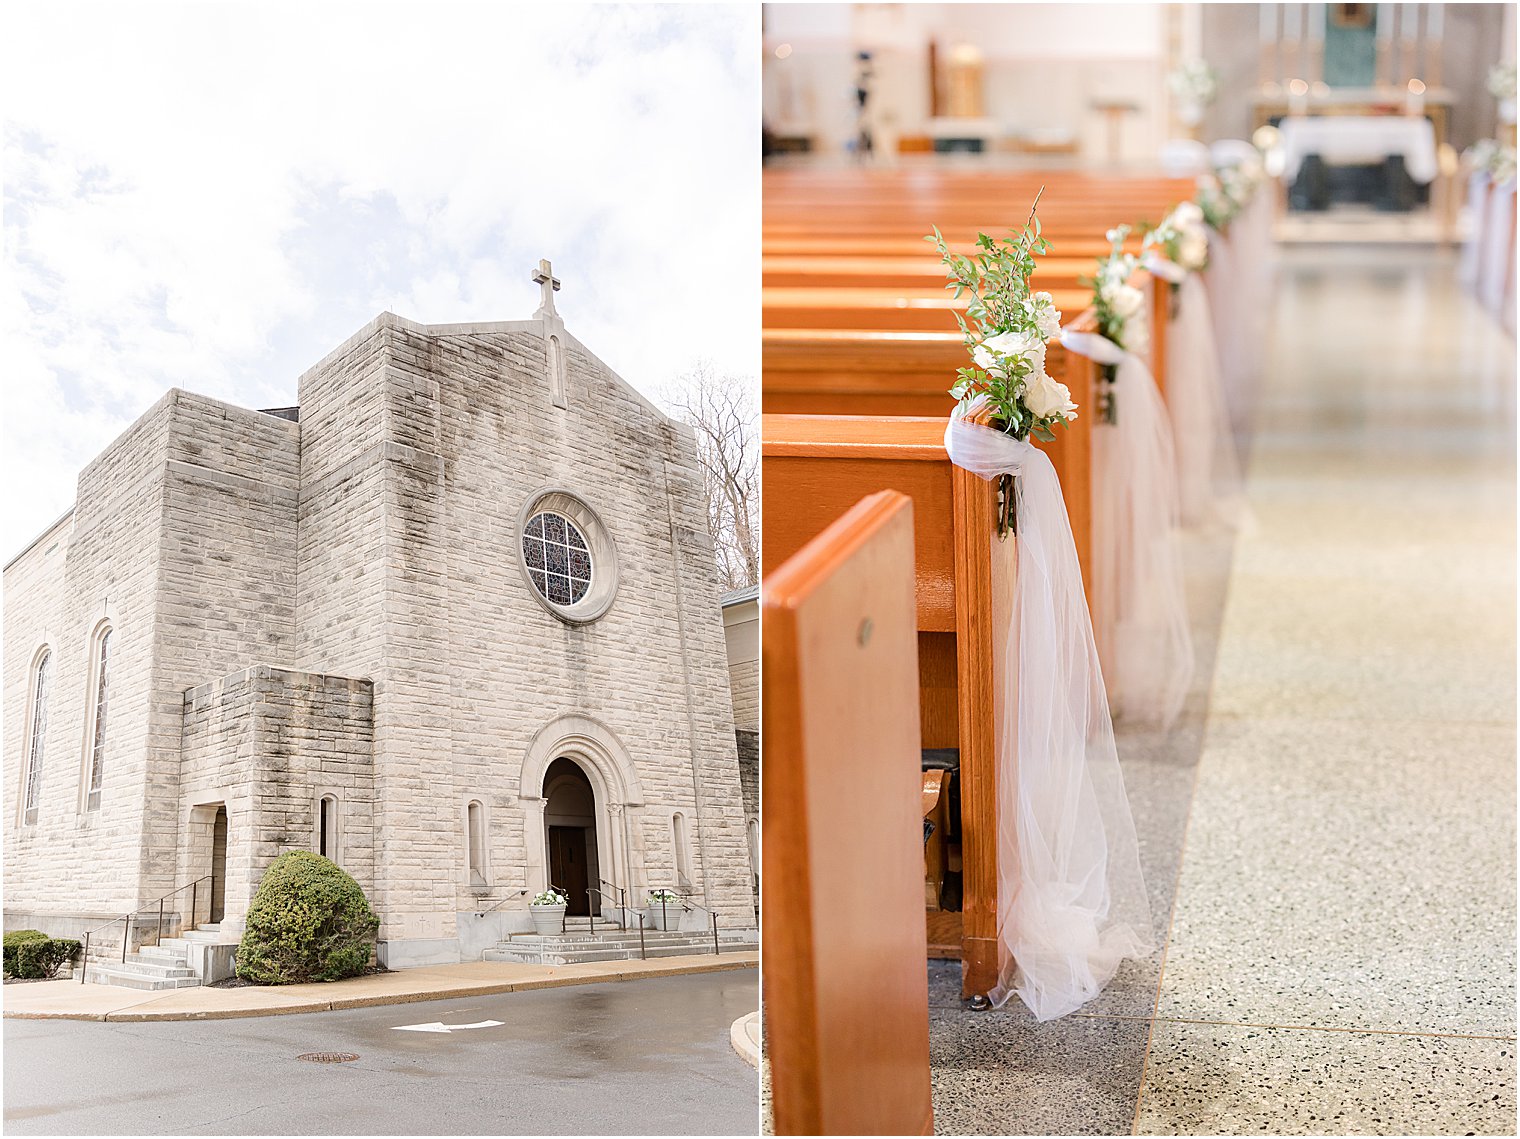 ceremony details at the Immaculate Conception Chapel at Mount Saint Mary Academy